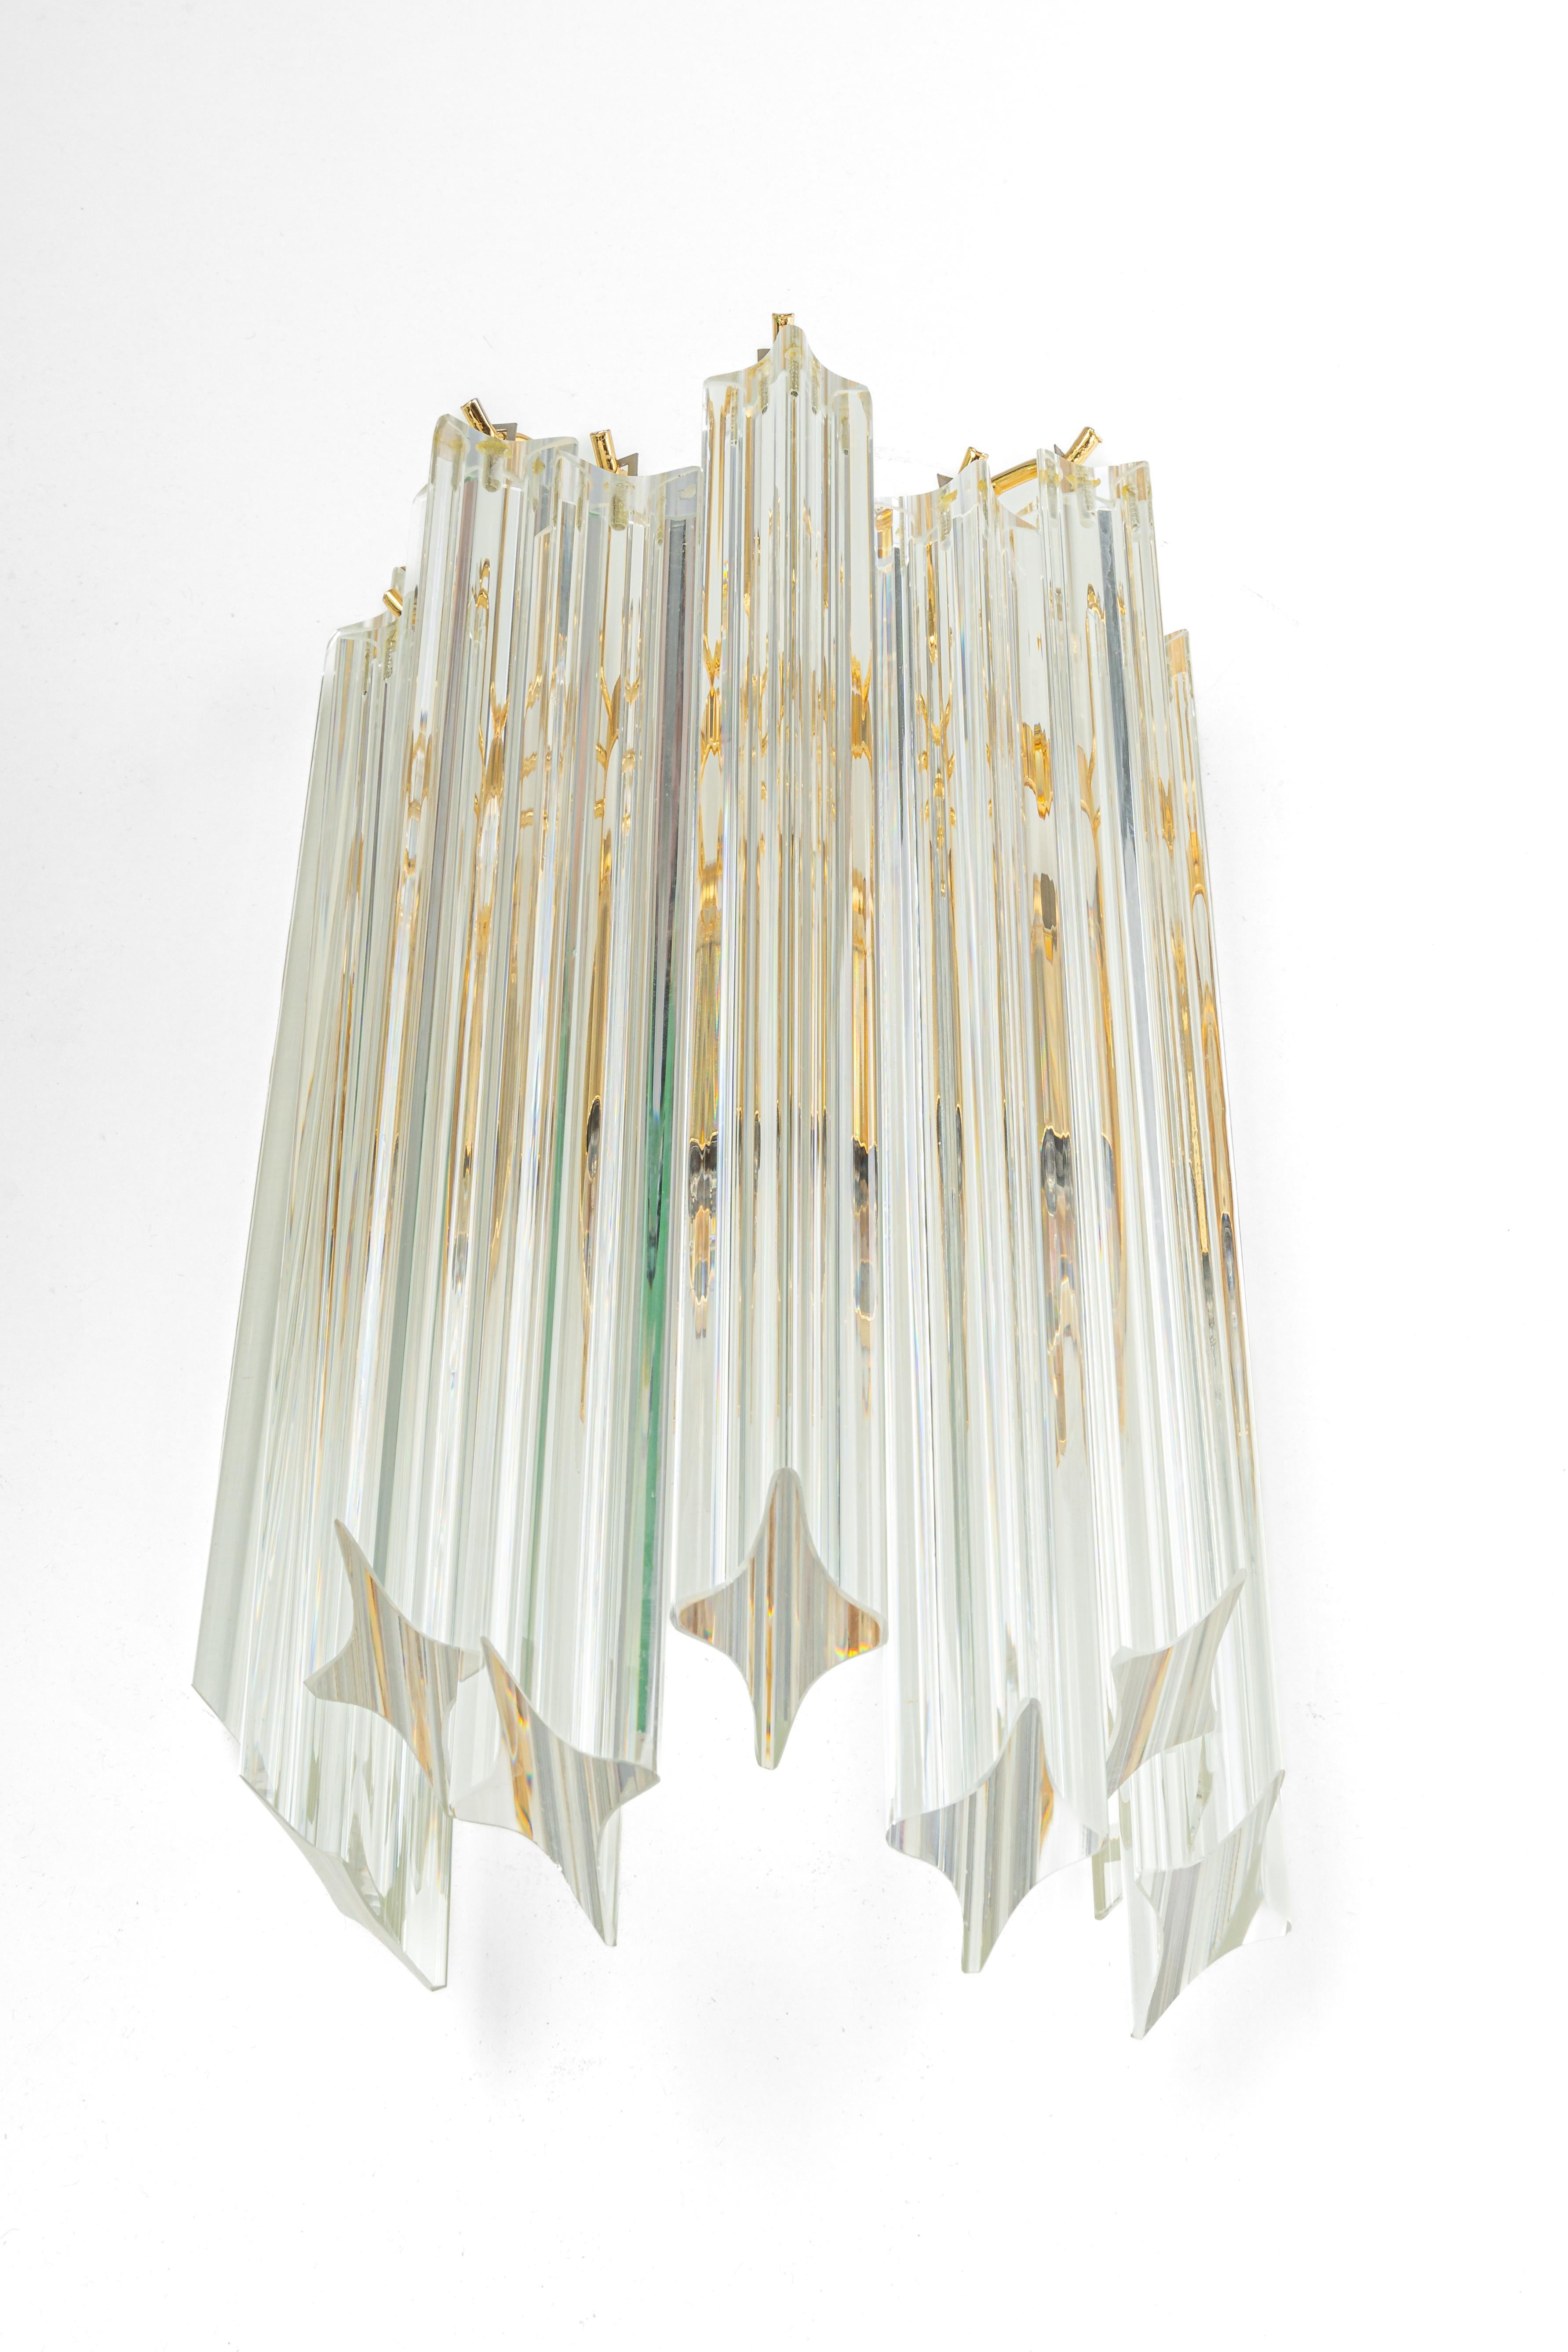 1 of 3 Crystal Glass Wall Lights in Venini Style, Italy, 1980s For Sale 2